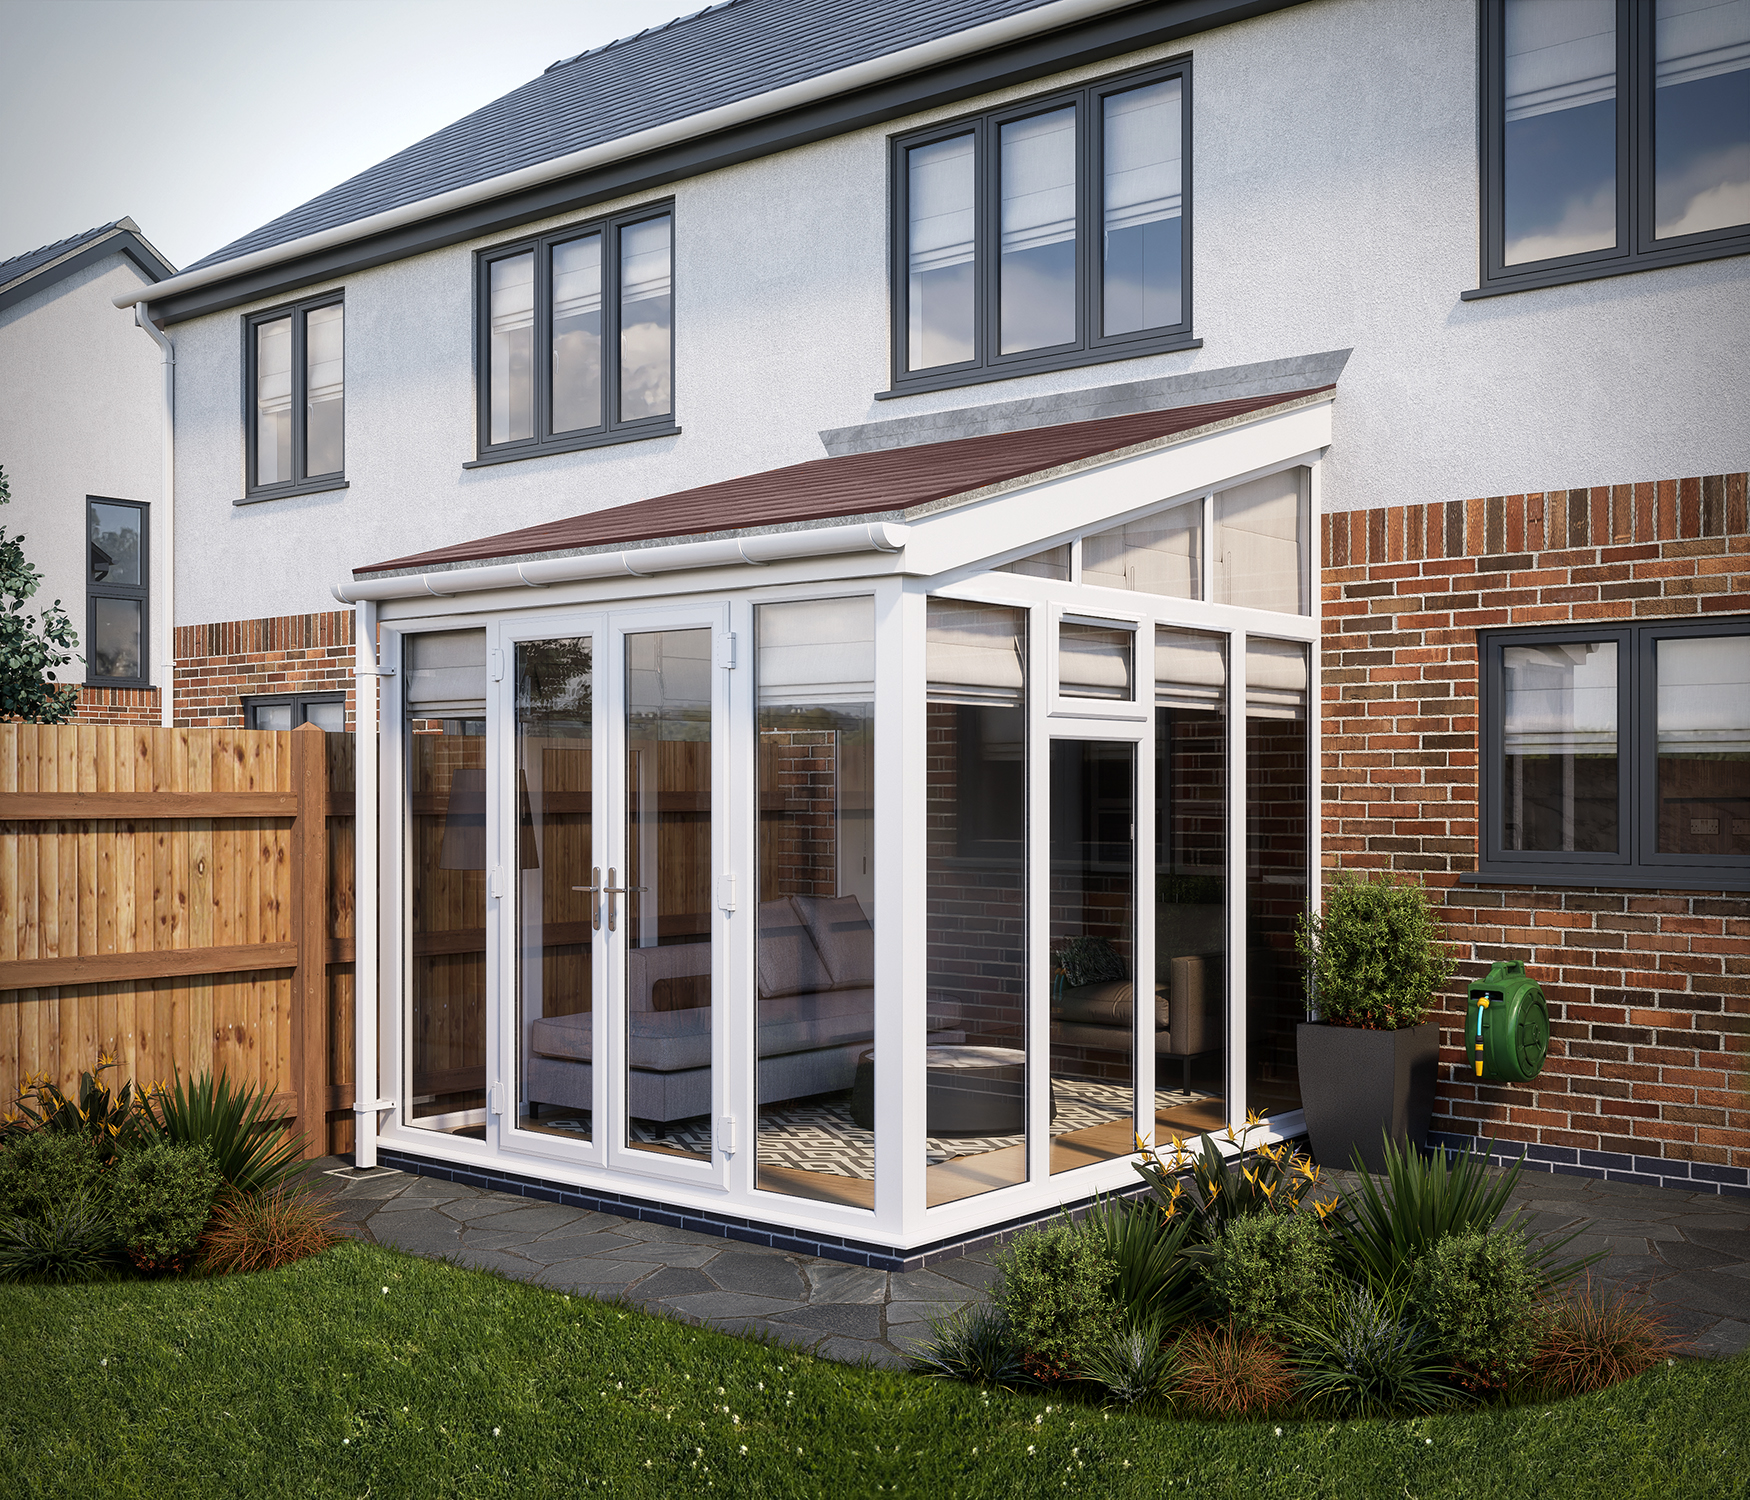 Image of SOLid Roof Full Height Lean to Conservatory White Frames with Rustic Brown Tiles - 10 x 10ft